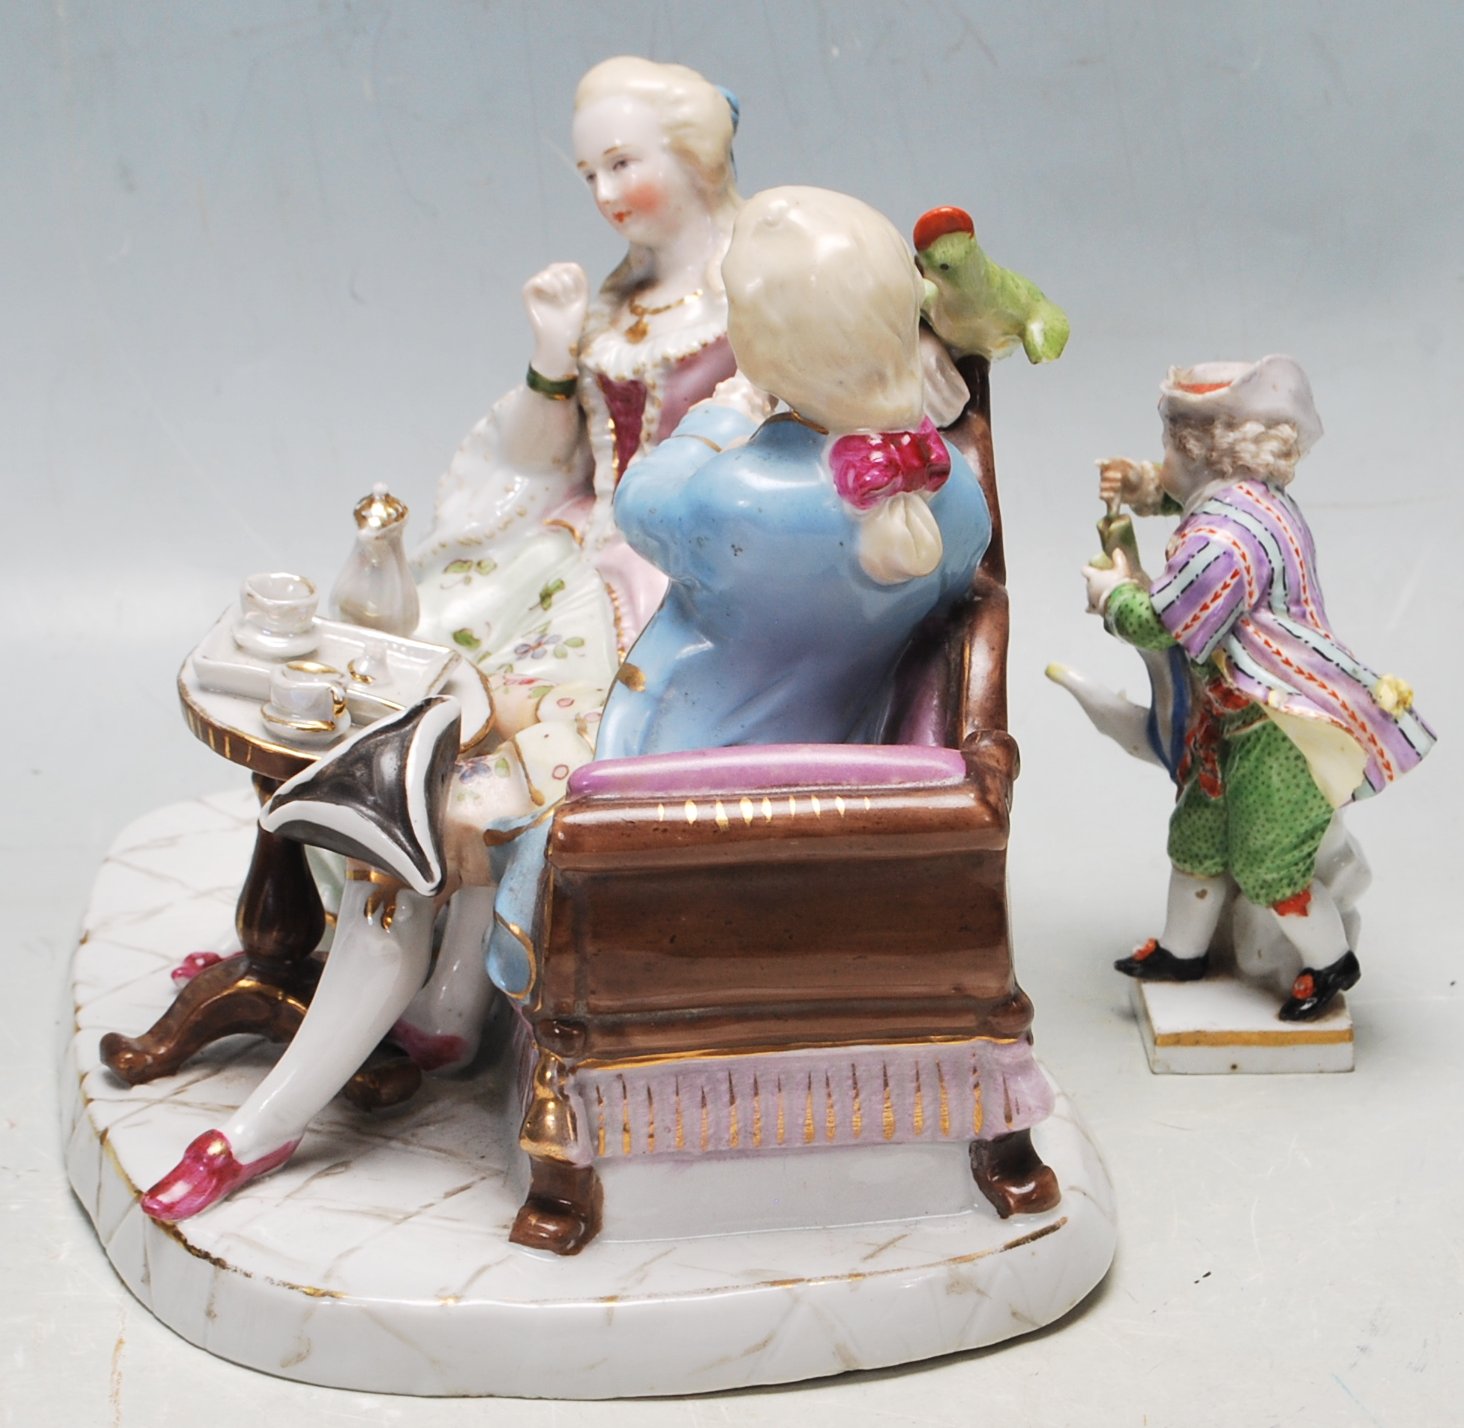 ANTIQUE 19TH CENTURY MEISSEN PORCELAIN FIGURINE TOGETHER WITH A GERMAN FIGURINE OF A COURTING COUPLE - Image 4 of 6